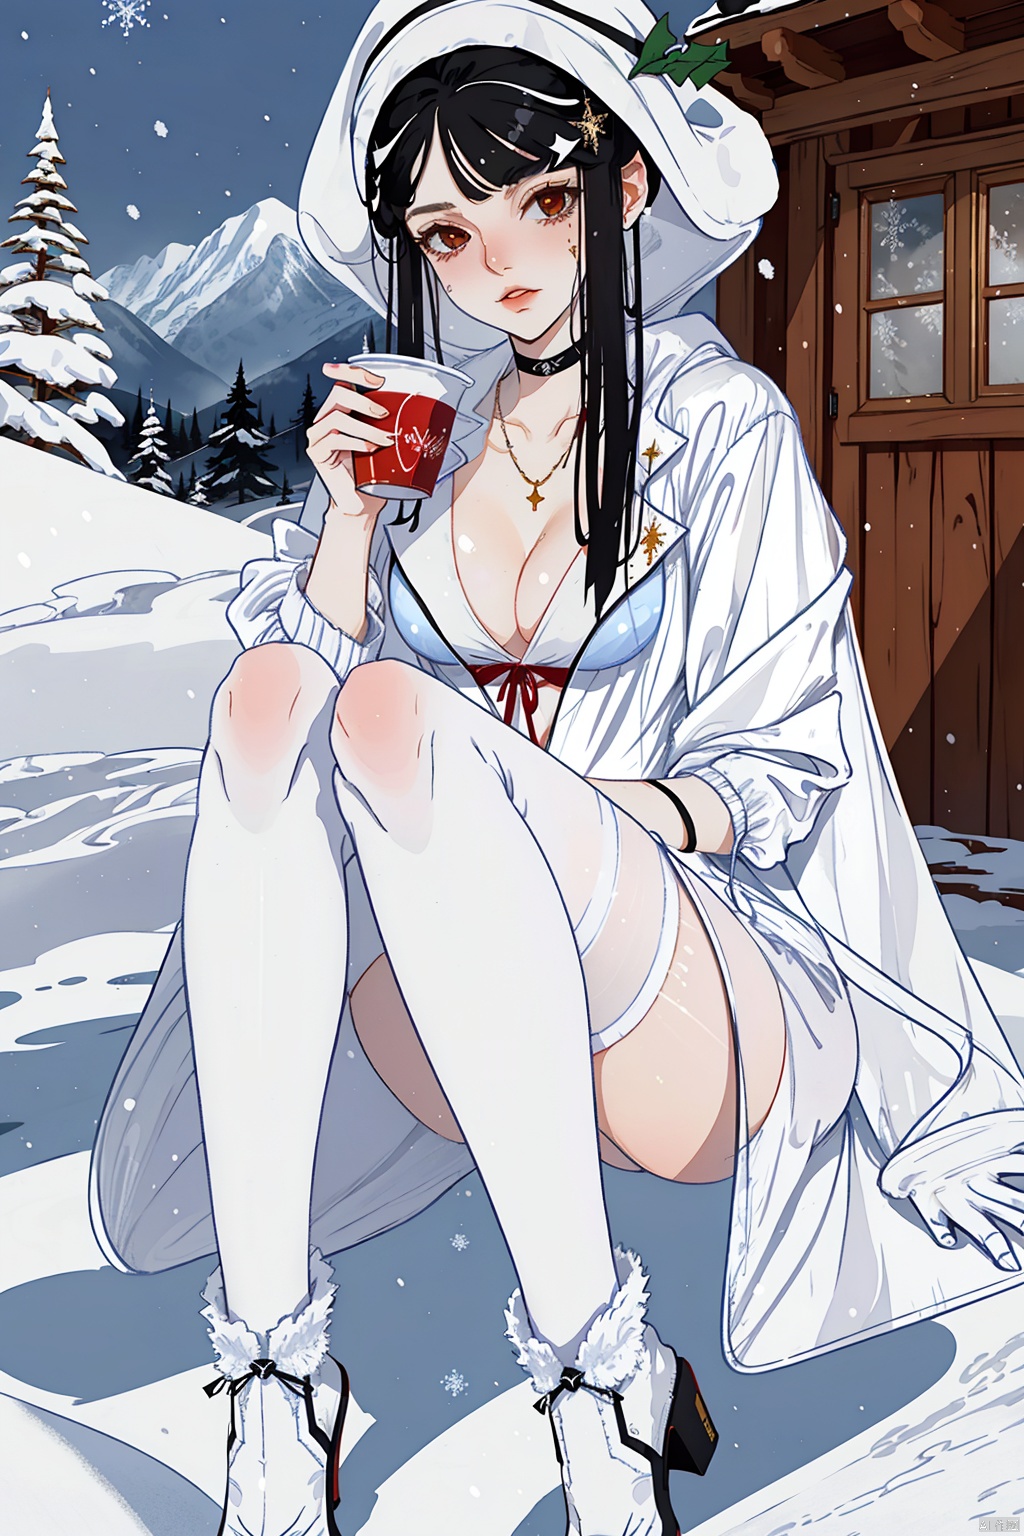  Full-body, (1girl in the Snow:1.4), black hair, White plush hat with Elk horn decoration, Holding a cup in hand, White sling, collarbone, cleavage, (white windbreaker:1.4), (black knee length stockings:1.4,)
Shinypantyhose, black high heeled boots, winter, snow, forest, sunshine, distant red cabin, Dingdal light, warm sunshine, HD 16k, snow, winter, light master,